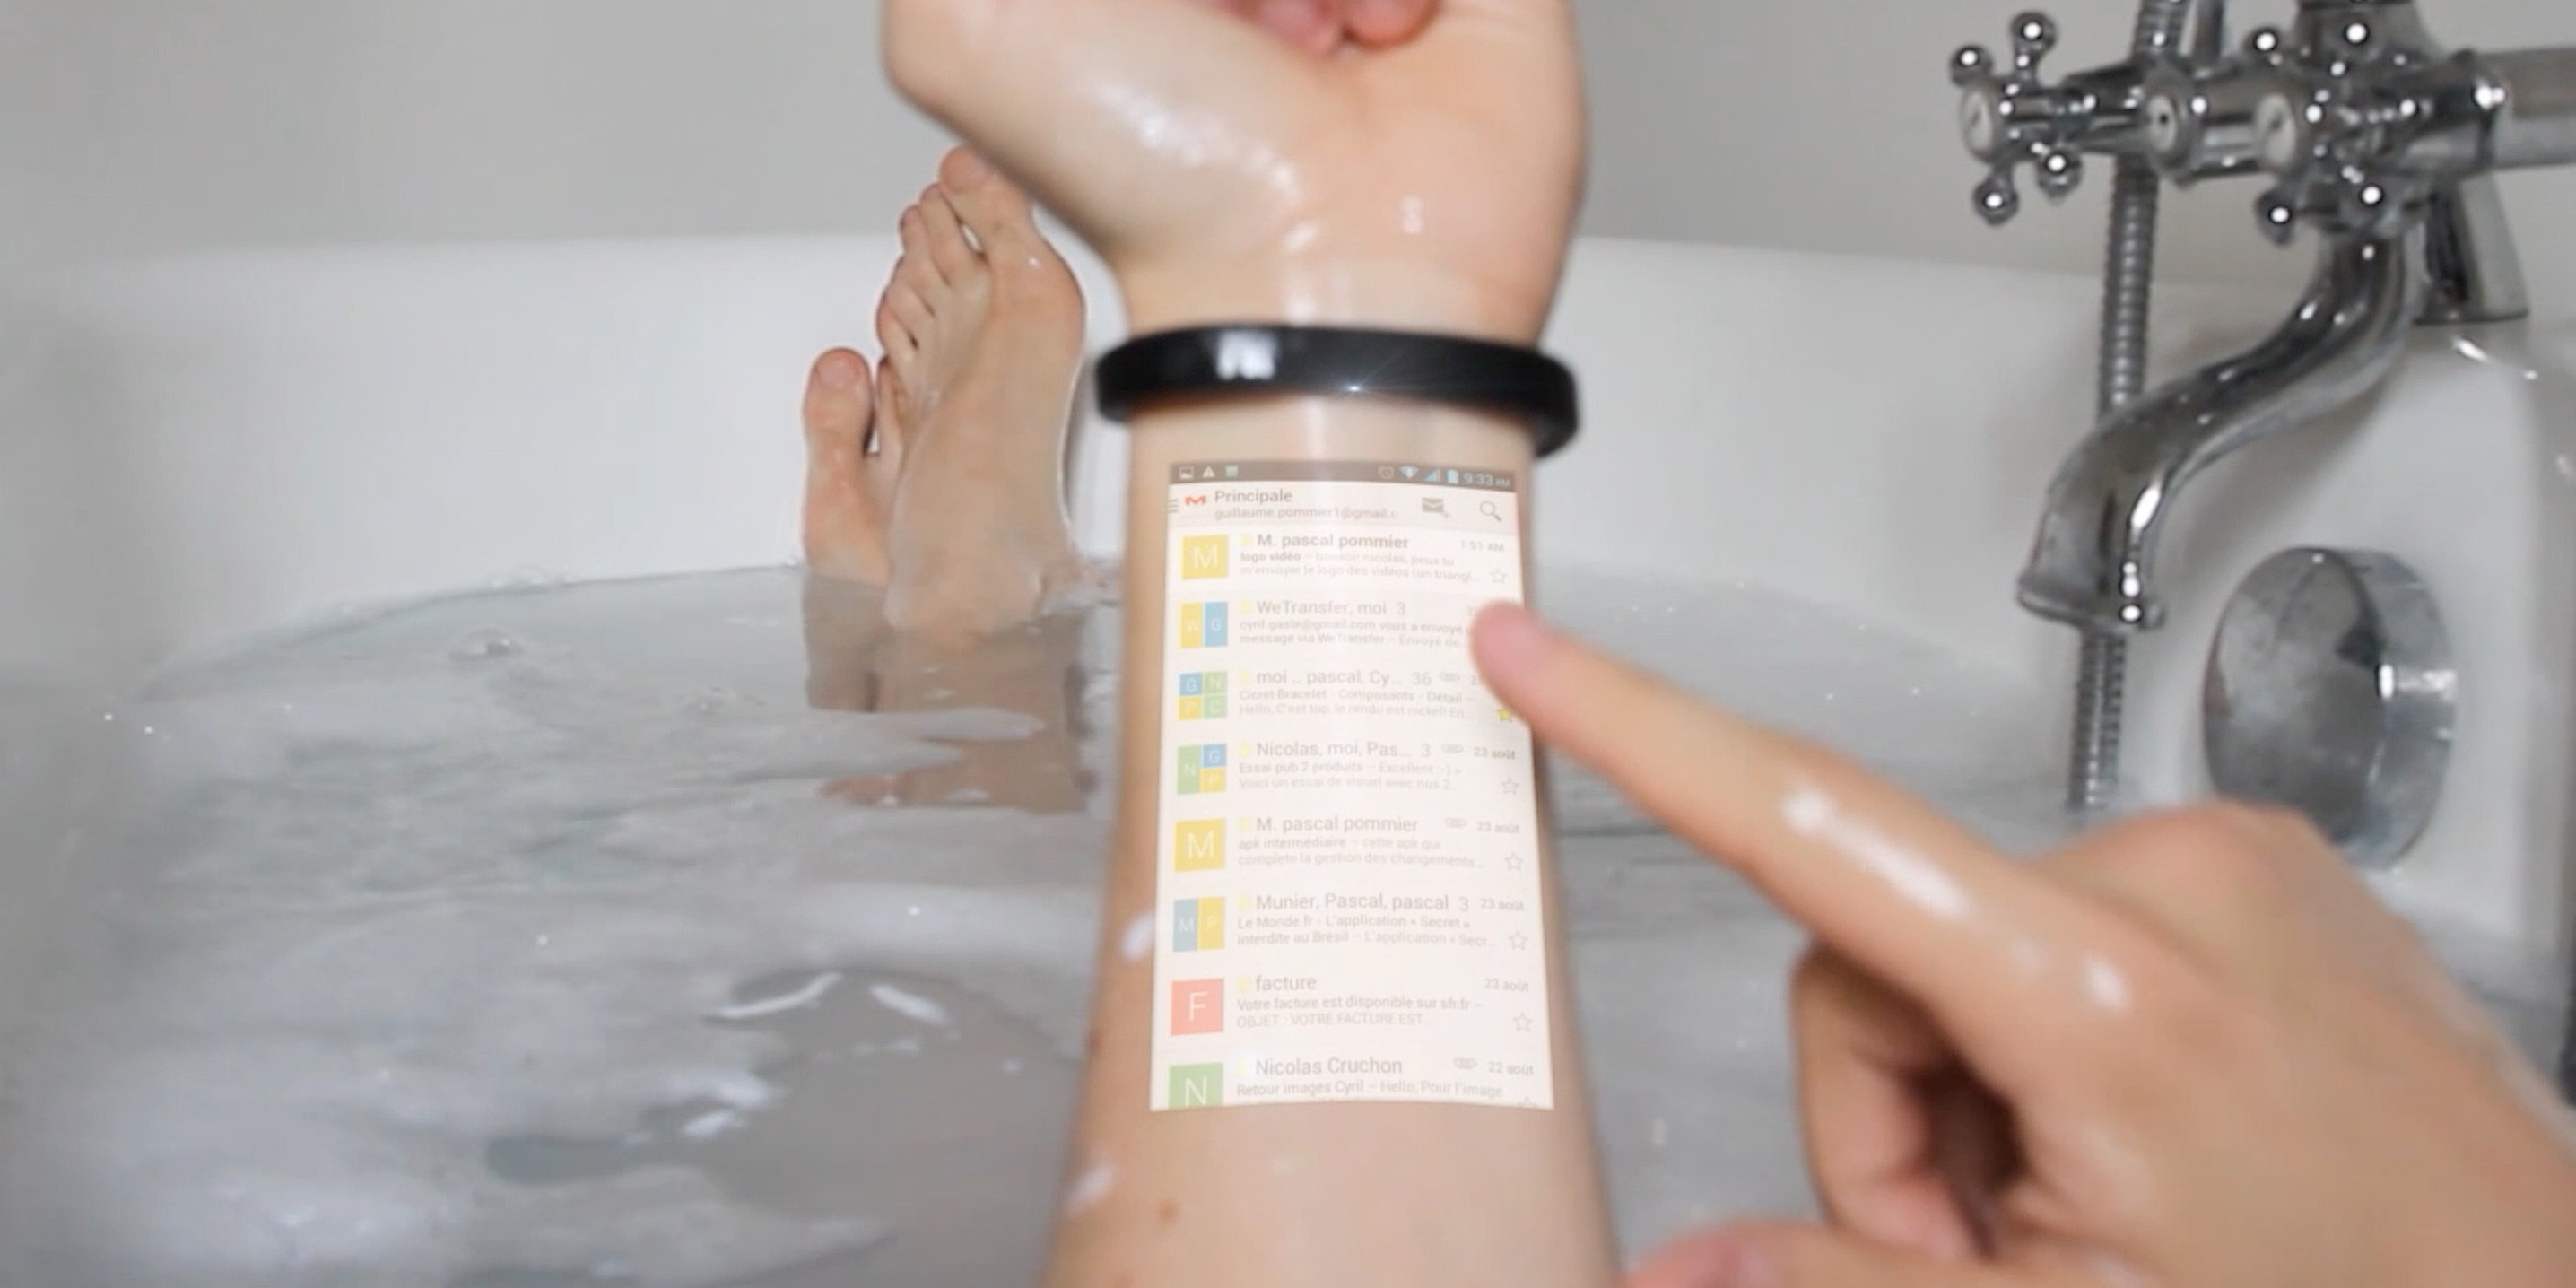 Cicret wearable aims to turn your skin into your tablet - but is it hype or  reality? | ZDNET